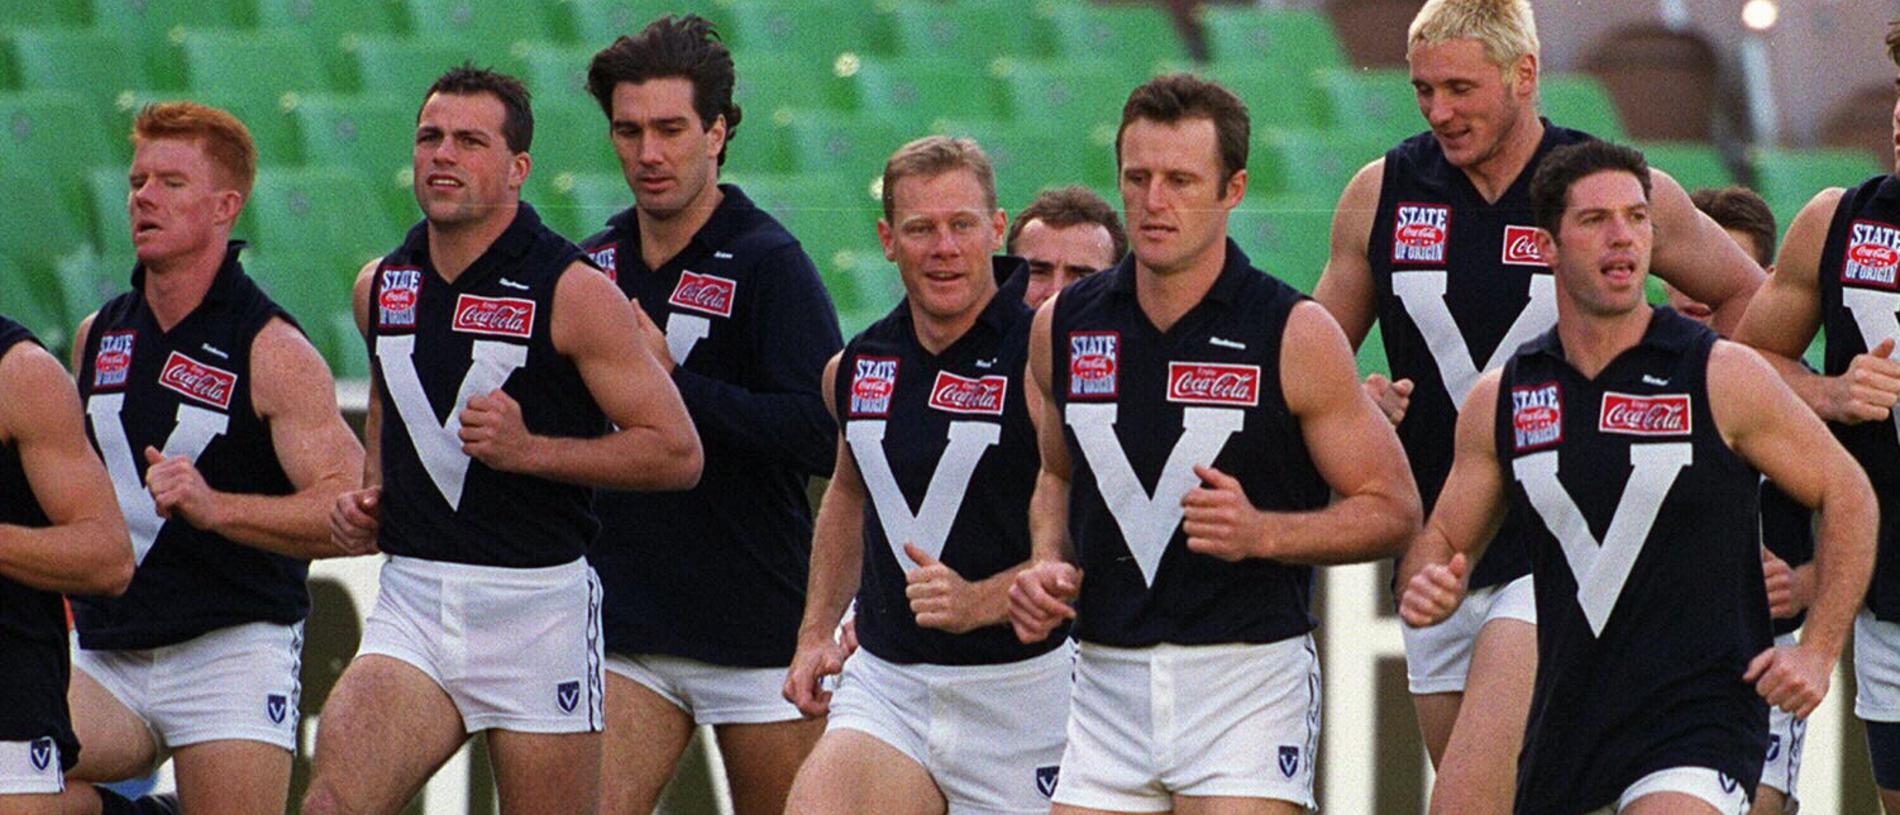 MAY 28, 1999 : Victorian team during training at MCG preparing for their upcoming AFL State of Origin game against South Australia, 28/05/99. Pic Ray Titus.
Australian Rules